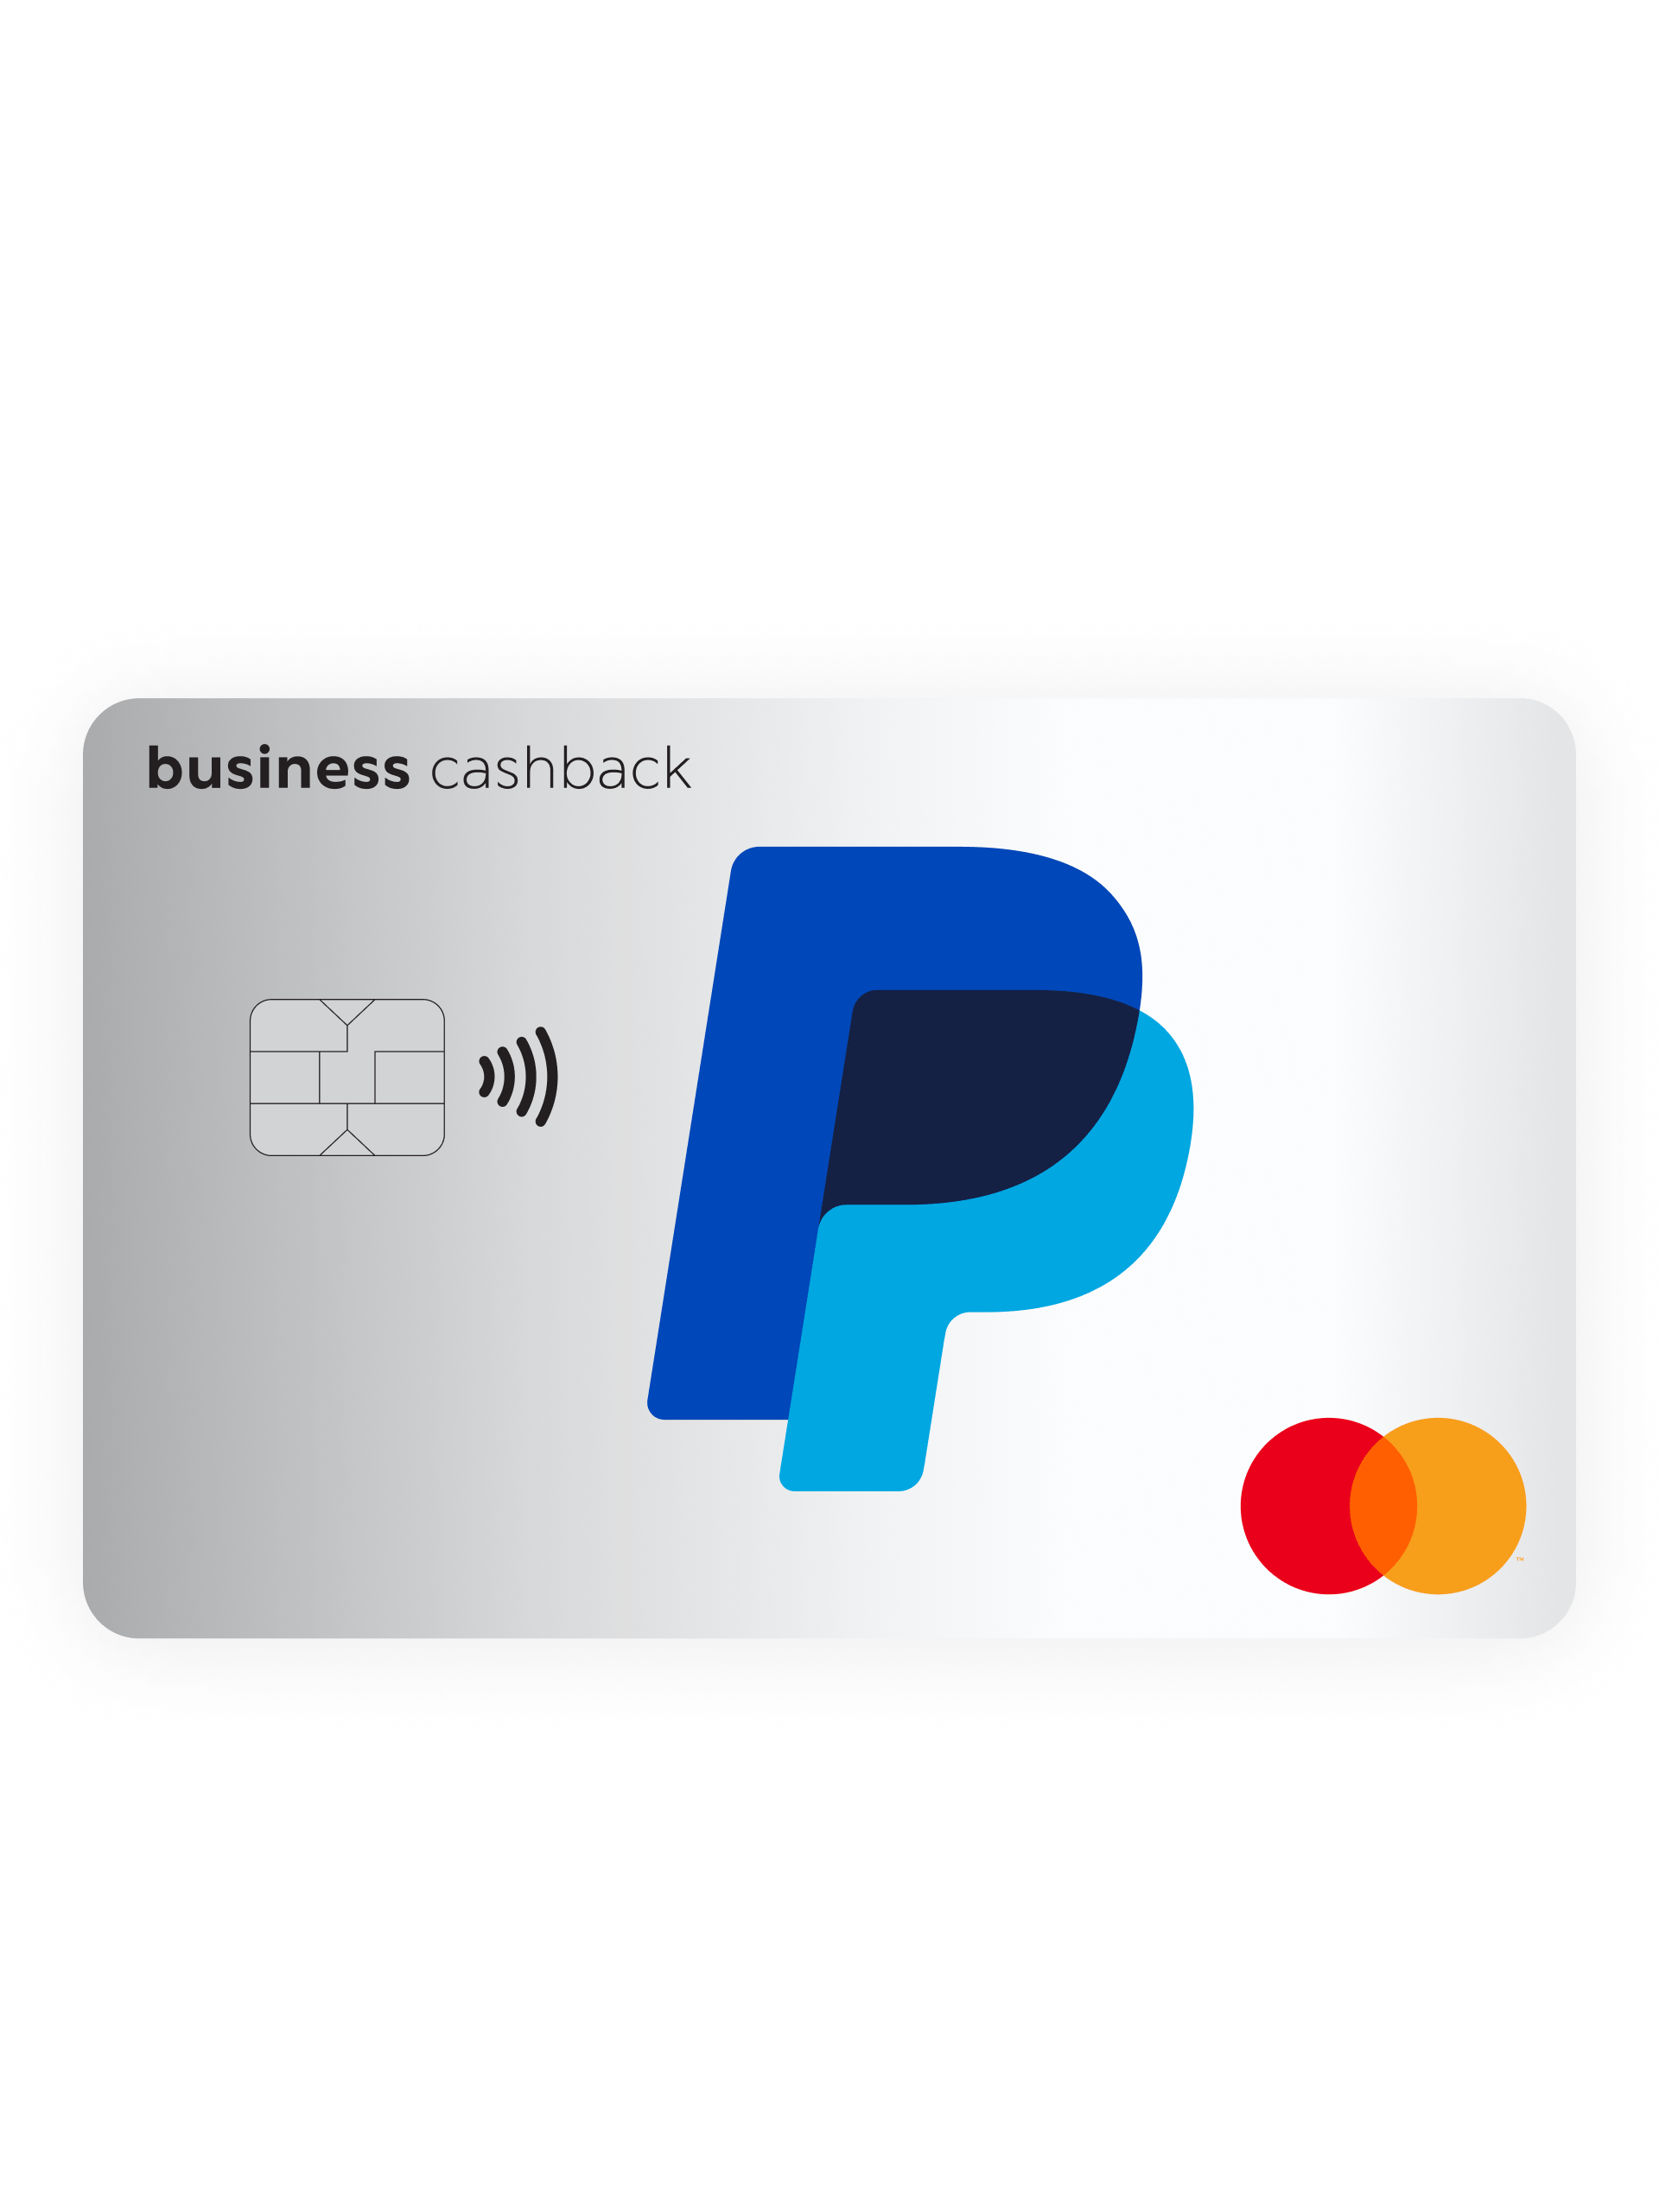 Should you use a credit card to send money on Paypal?